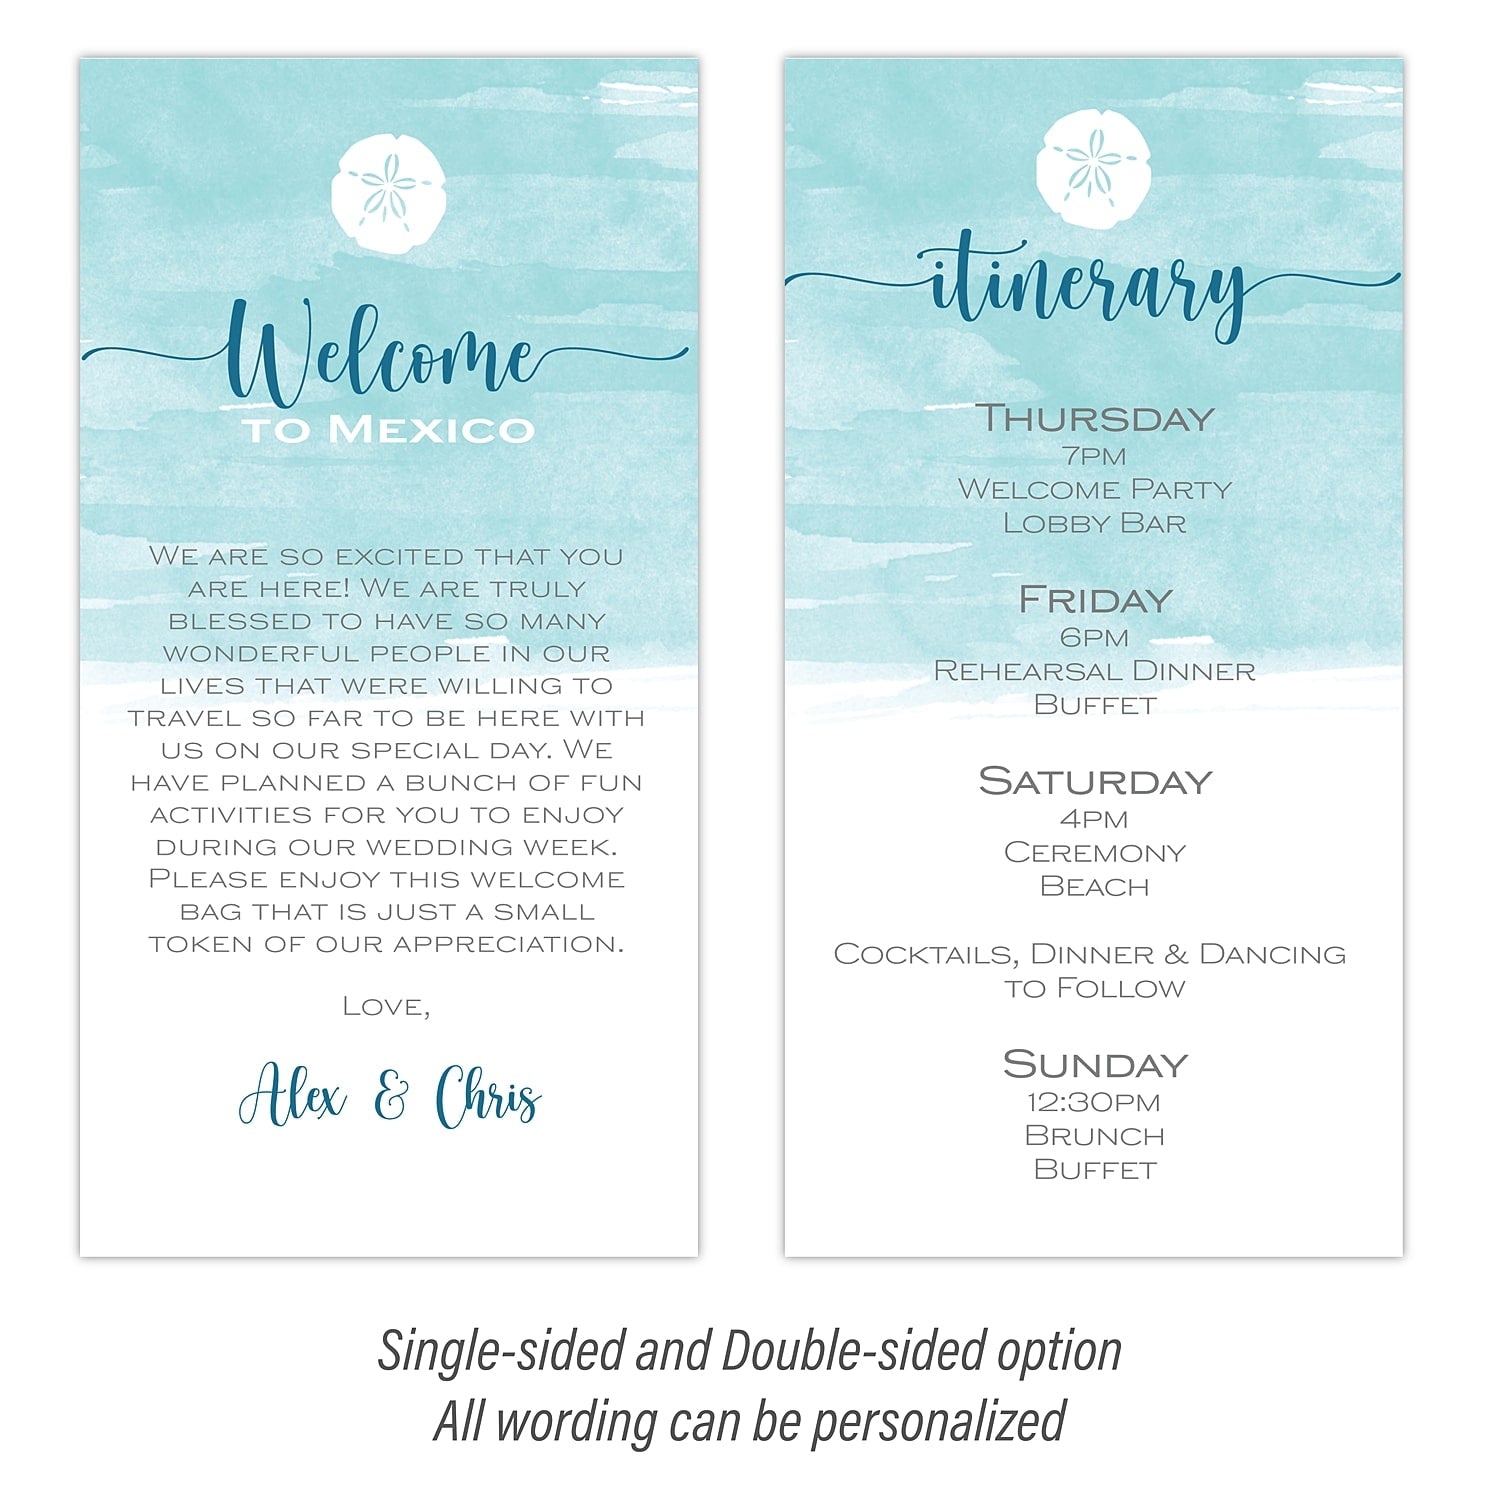 Personalized Wedding Welcome Letter & Itinerary - Beach Sand Dollar